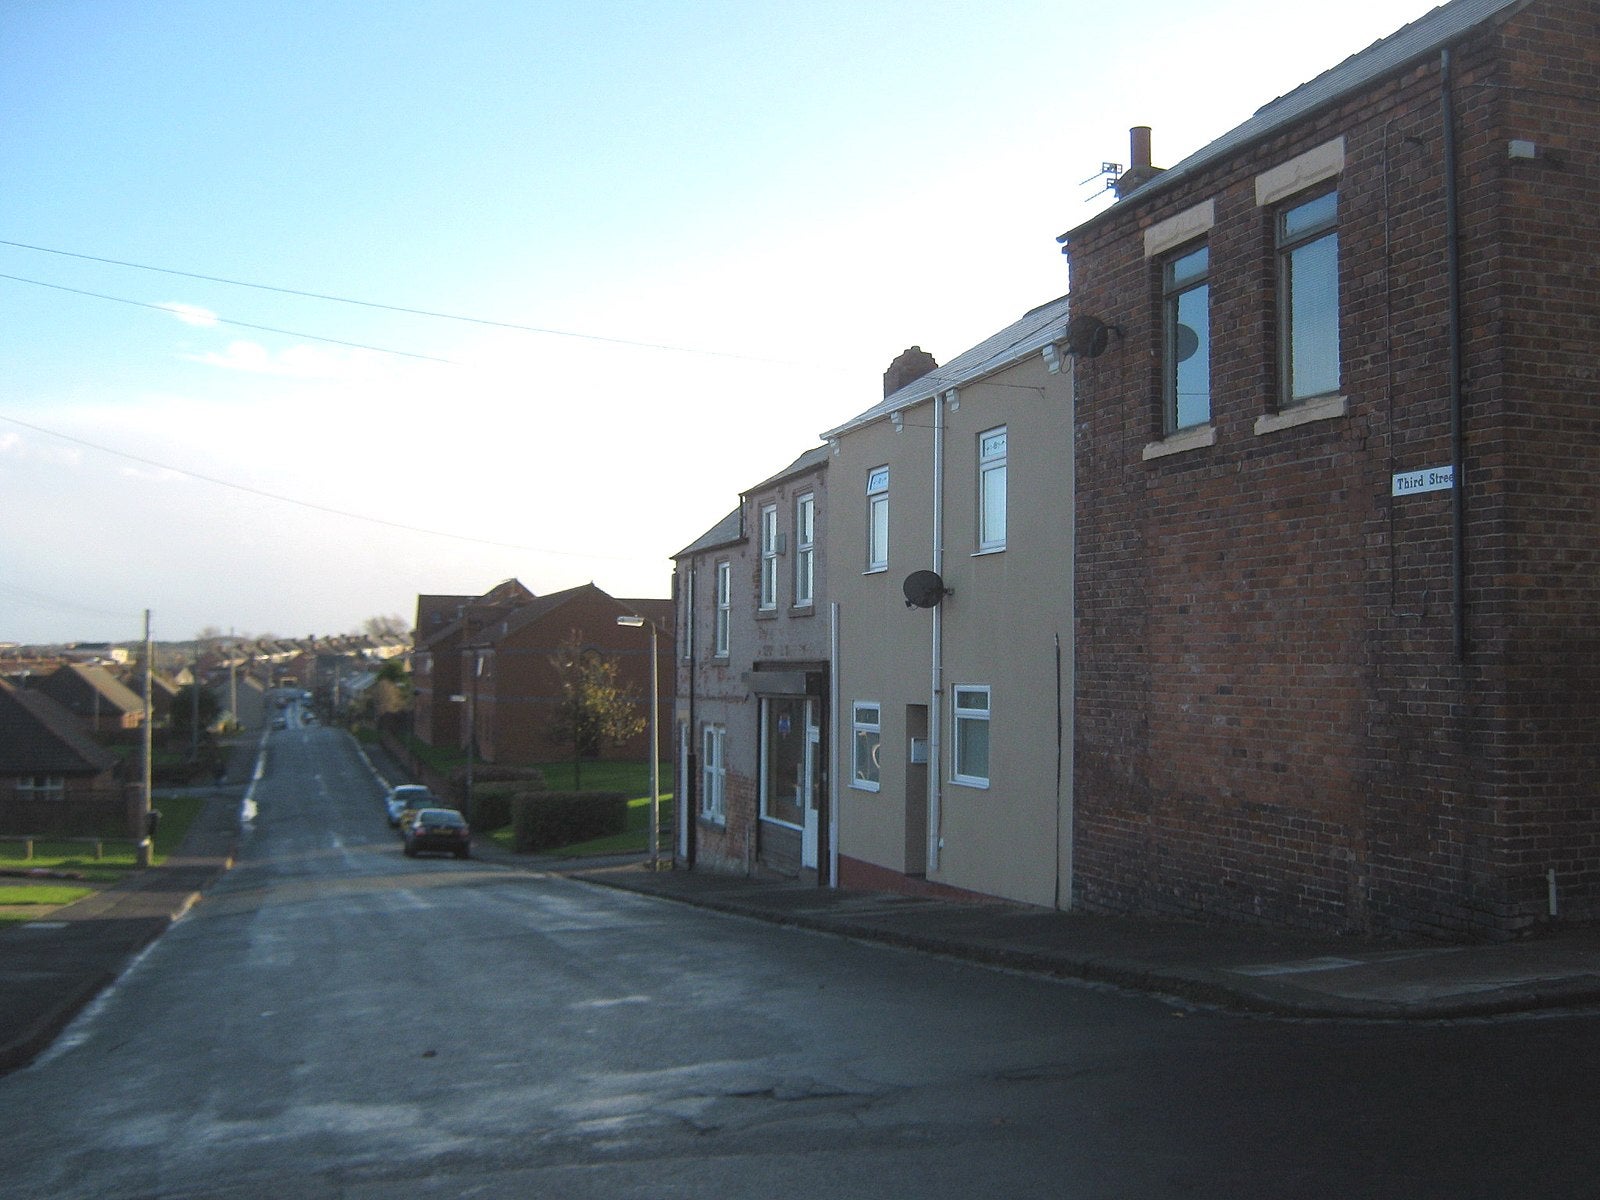 A former mining hotspot, Horden has suffered high unemployment levels since its closure in 1987